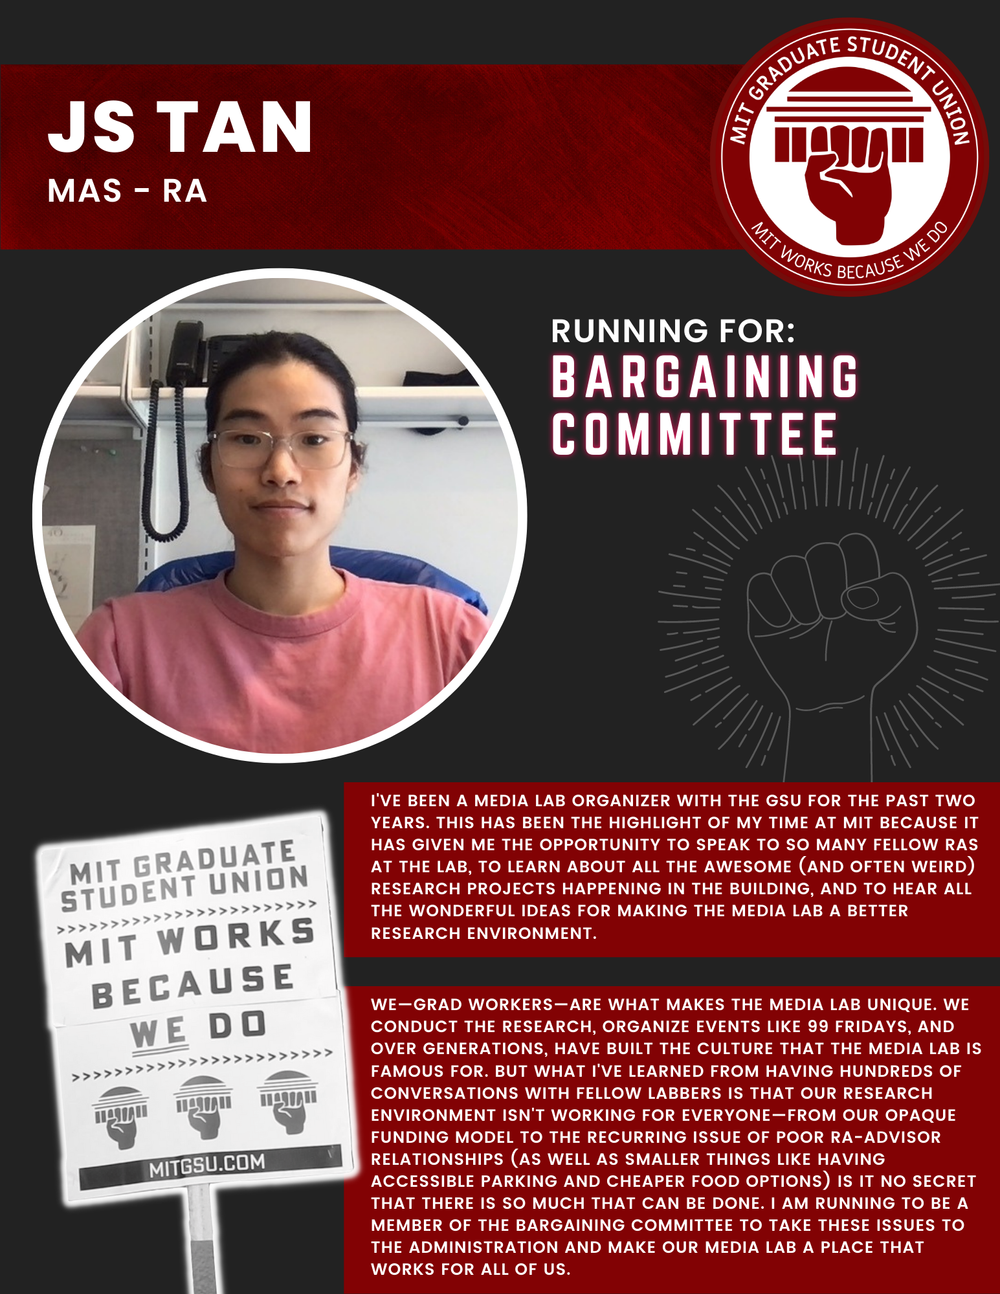  JS TAN MAS - RA   RUNNING FOR: Bargaining Committee  I'VE BEEN A MEDIA LAB ORGANIZER WITH THE GSU FOR THE PAST TWO YEARS. THIS HAS BEEN THE HIGHLIGHT OF MY TIME AT MIT BECAUSE IT HAS GIVEN ME THE OPPORTUNITY TO SPEAK TO SO MANY FELLOW RAS AT THE LAB